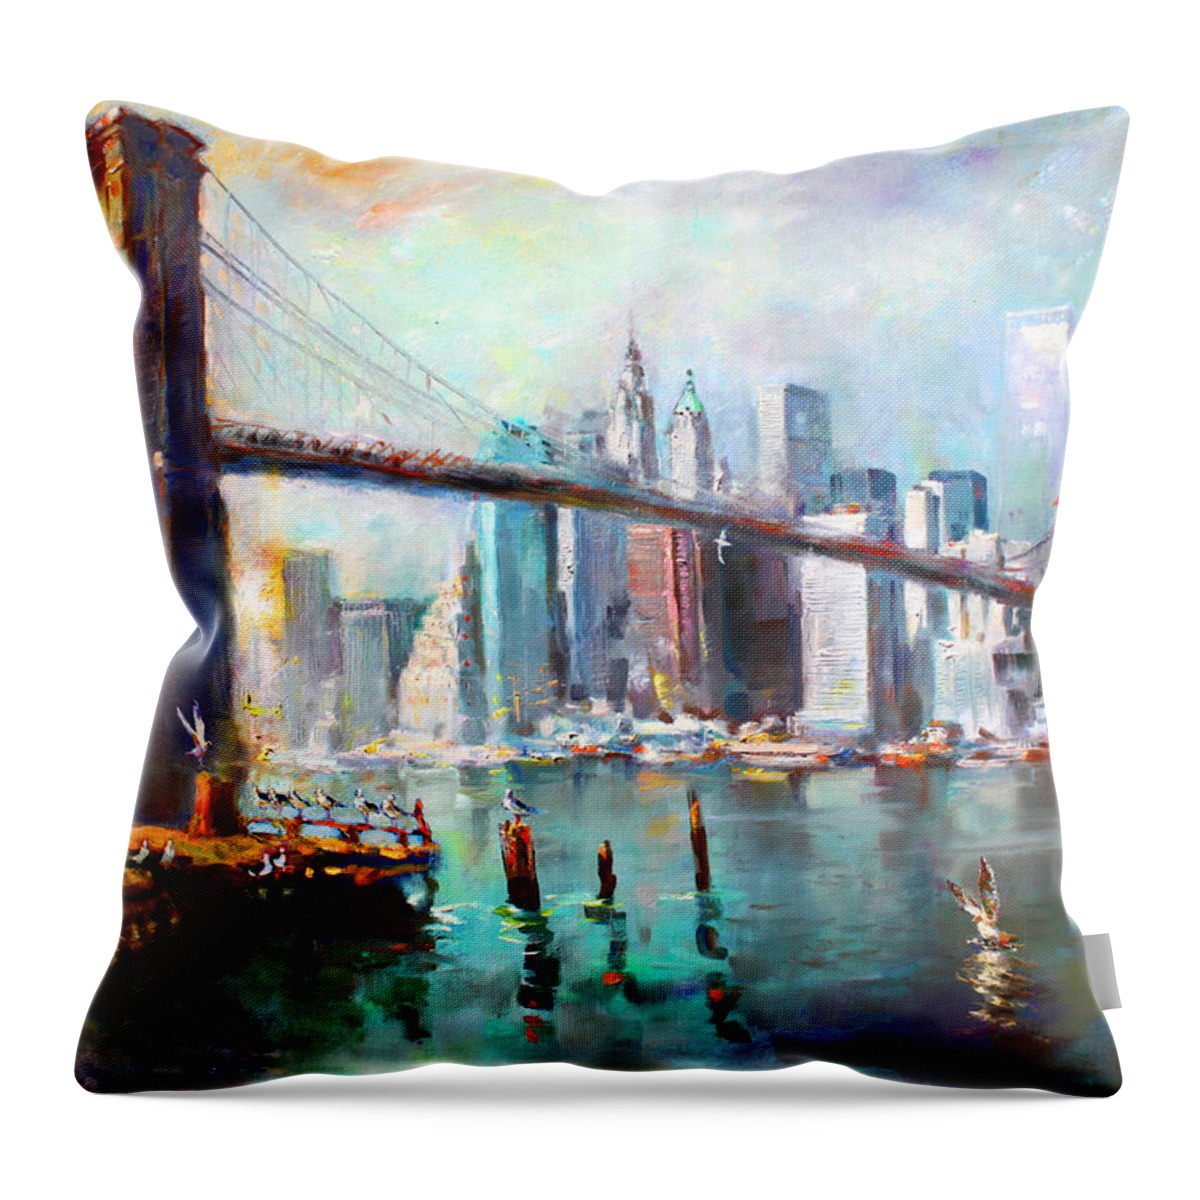 Nyc Throw Pillow featuring the painting NY City Brooklyn Bridge II by Ylli Haruni